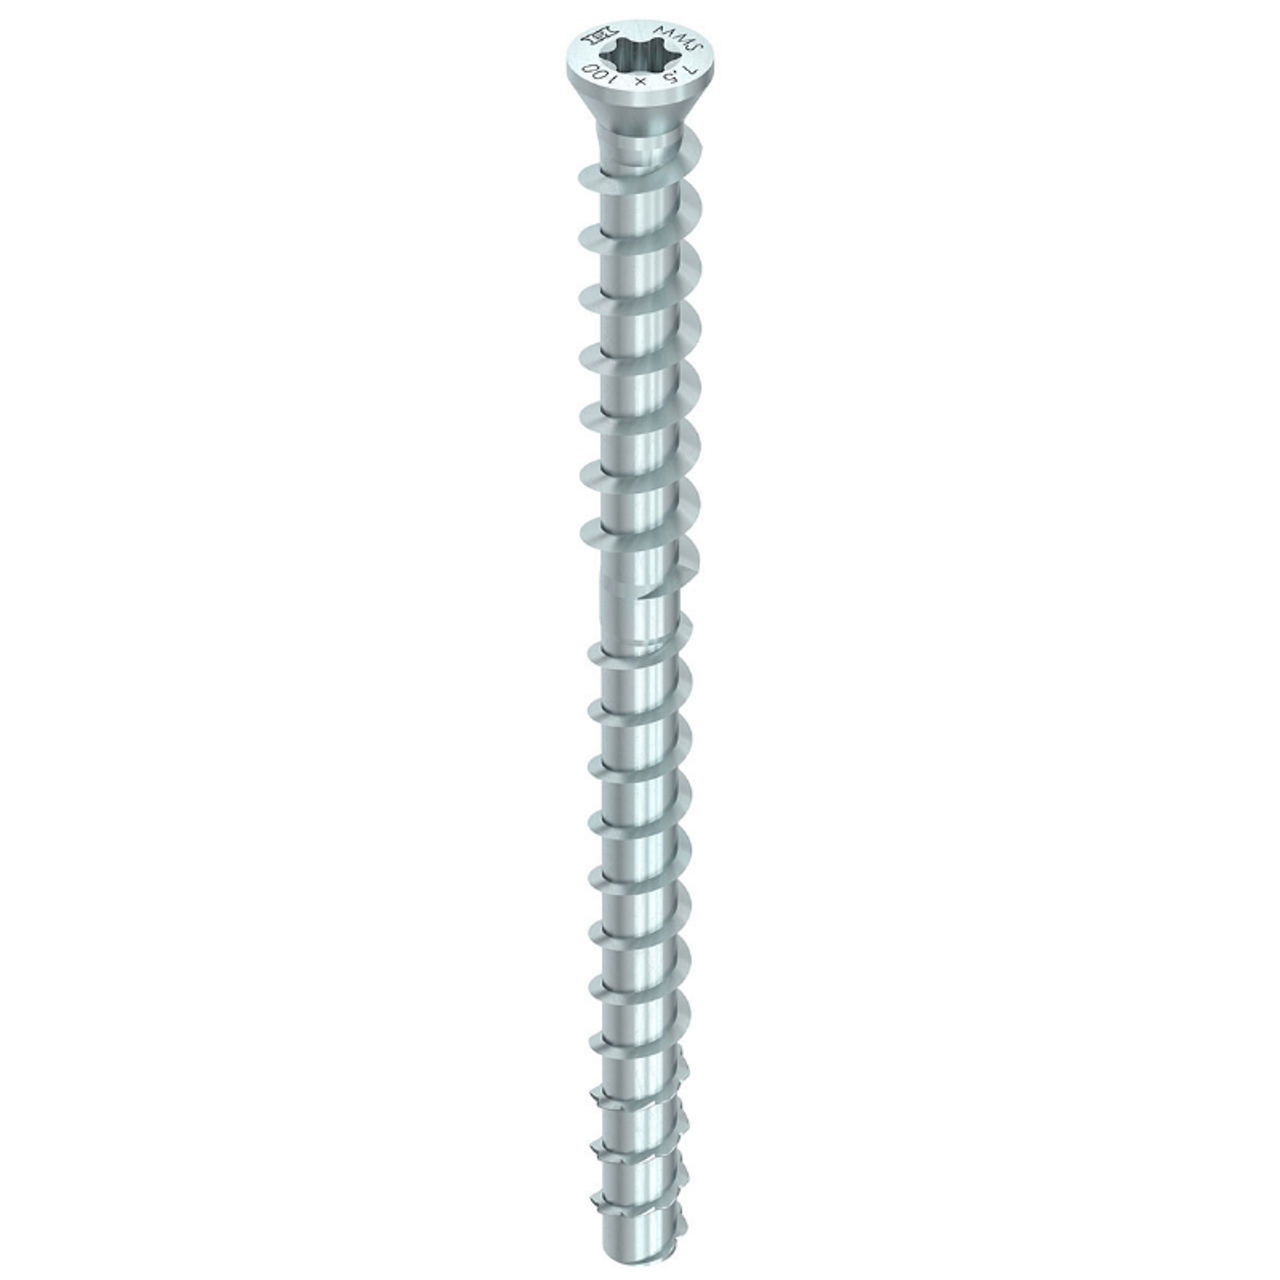 Craftsman Hardware supplies HECO 7.5mm Timber-Connect Screw Anchor with Silver Zinc for the Construction Industry and Installers in Glen Waverley, Bayswater and Mitcham